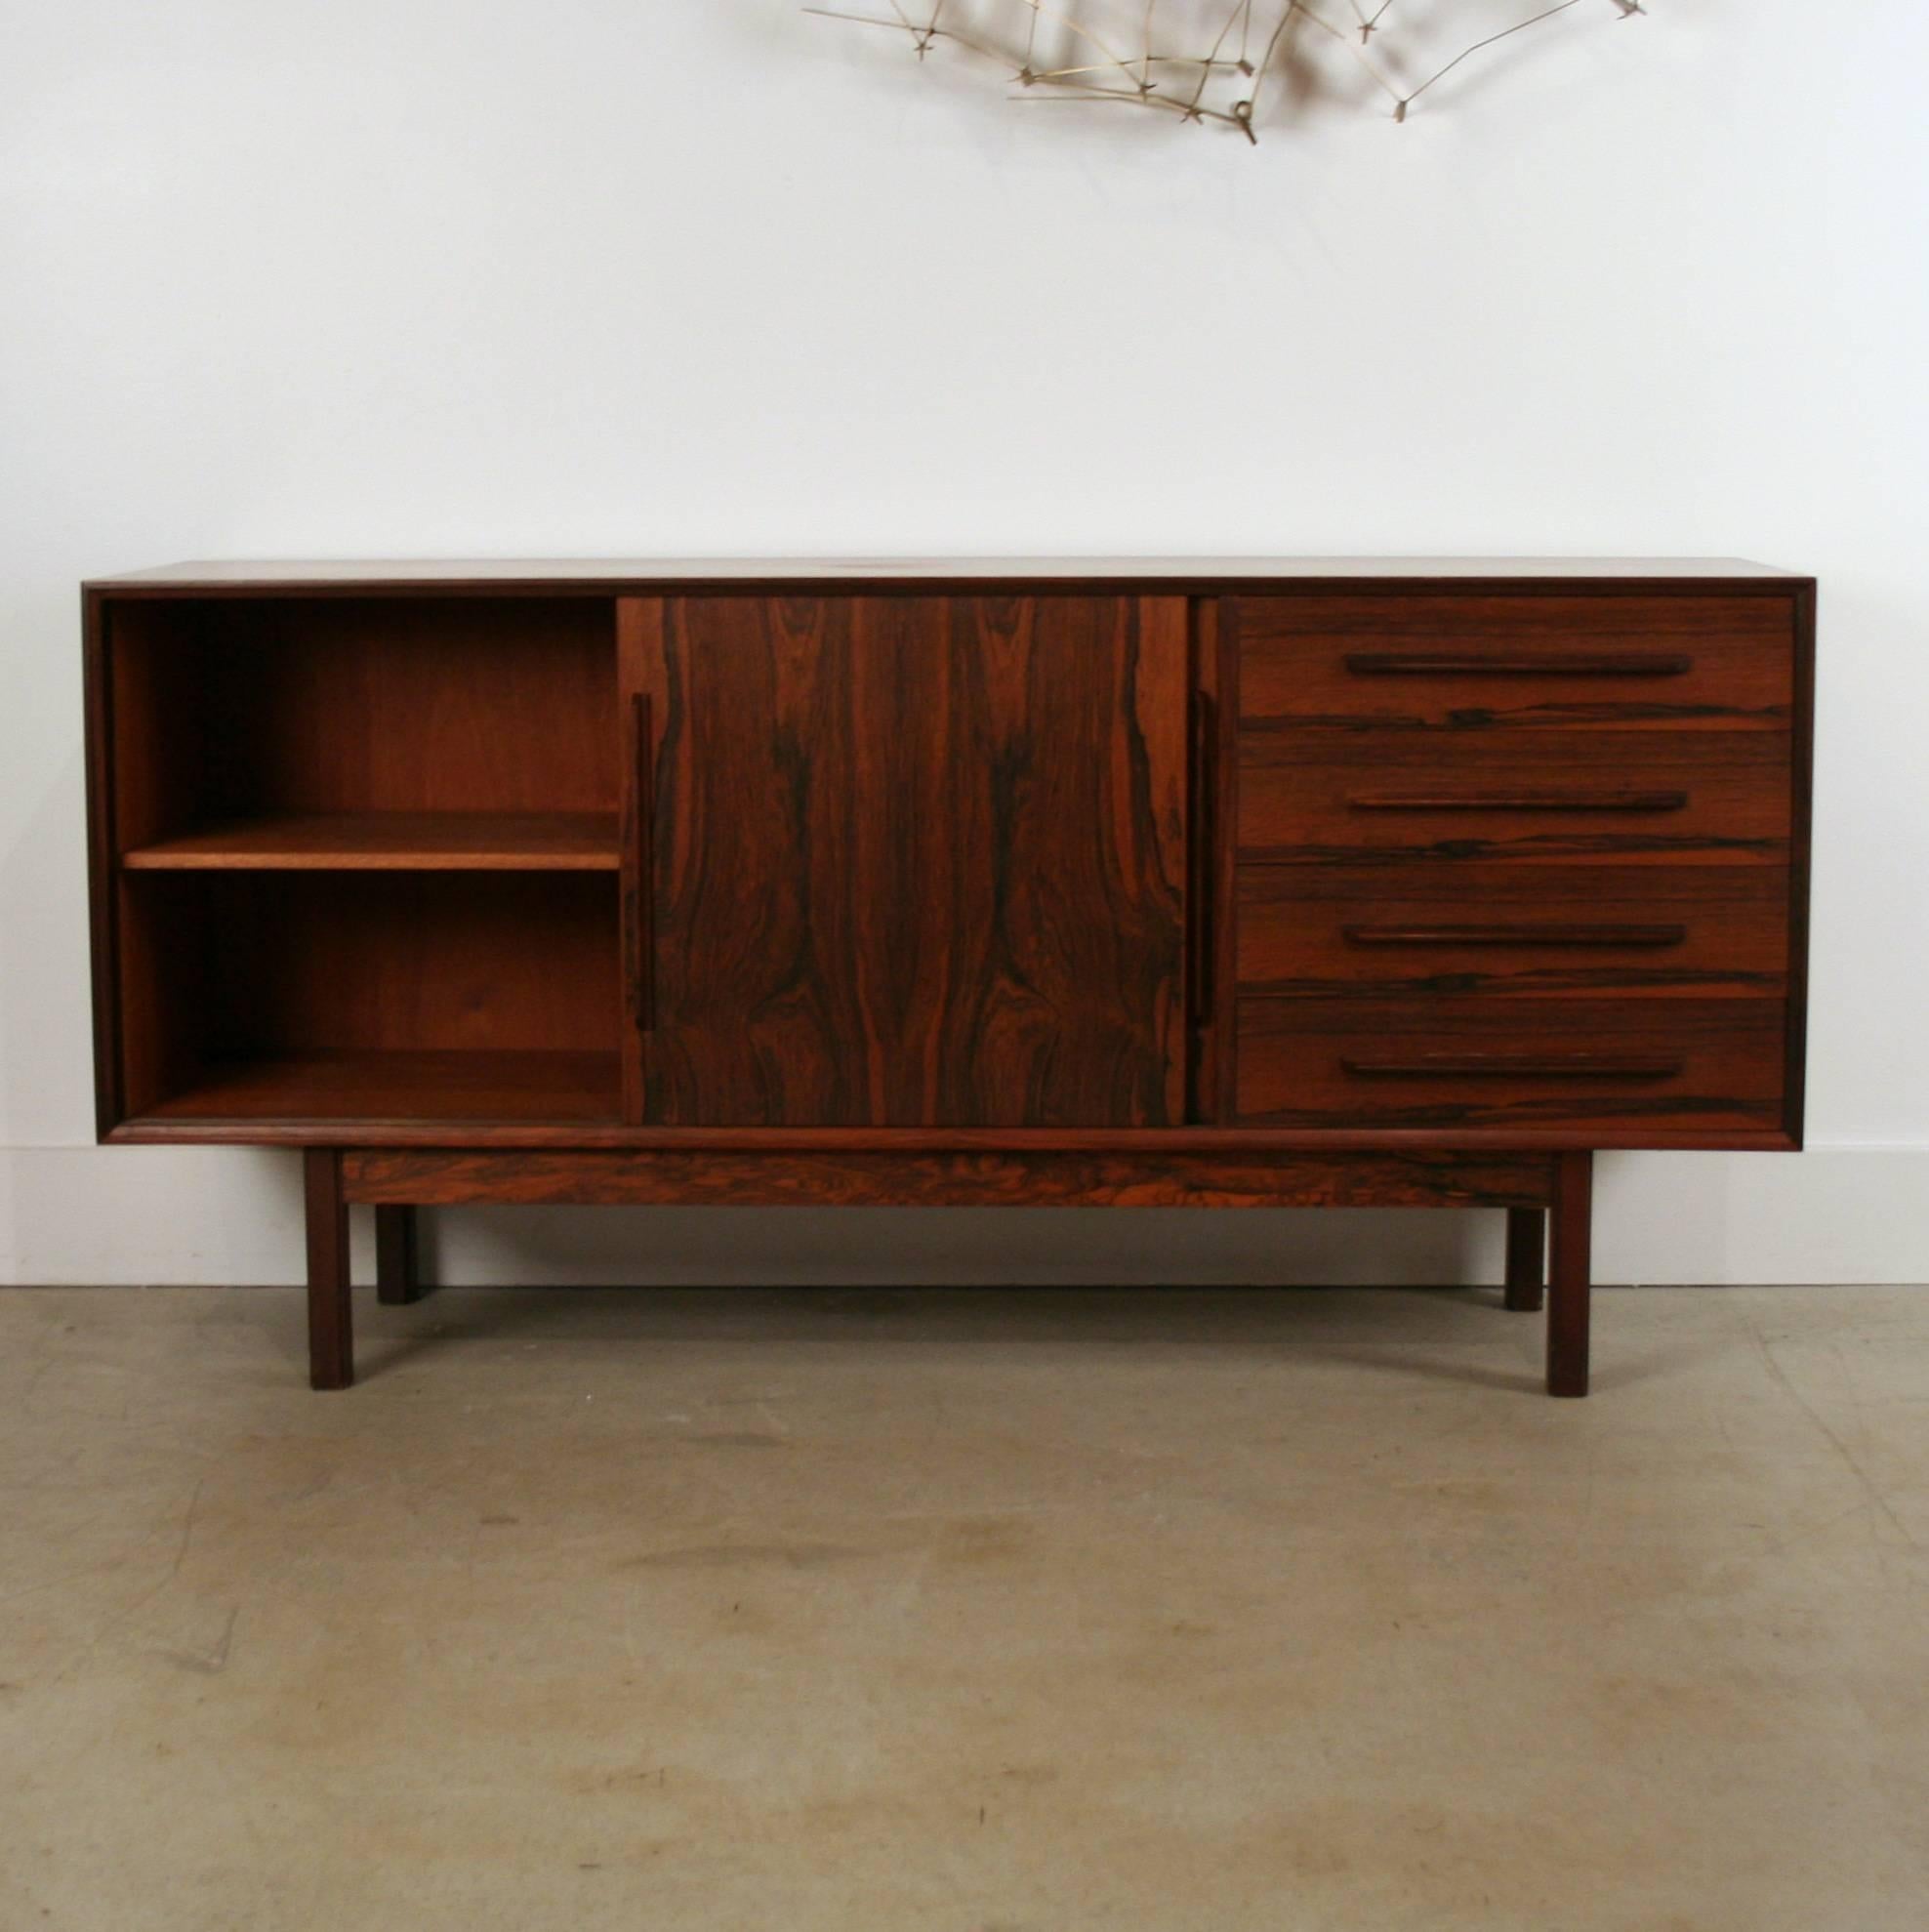 Exquisite vintage Danish sideboard crafted out of Brazilian rosewood. The patina is highlighted on the two sliding doors. Bank of four drawers along the right facing side. Solid rosewood edging, pulls and legs give this piece extra elegances. Made